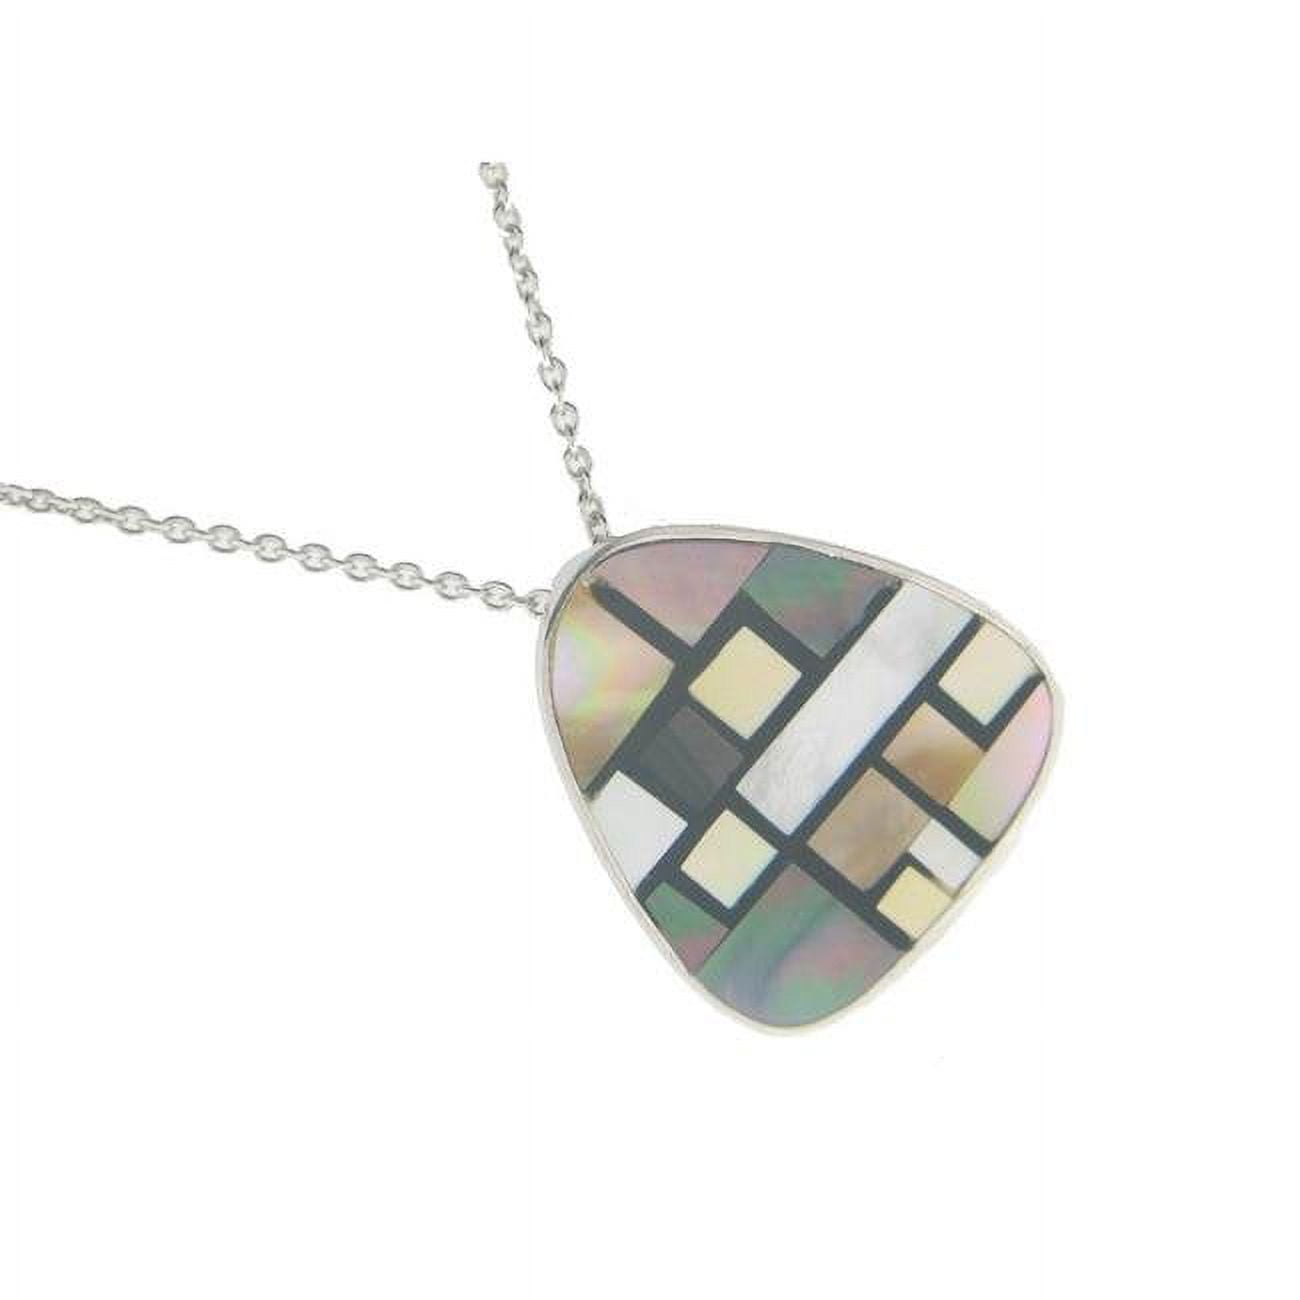 16 In. Vintage Triad Mother Of Pearl Pendant Necklace In 925 Sterling Silver